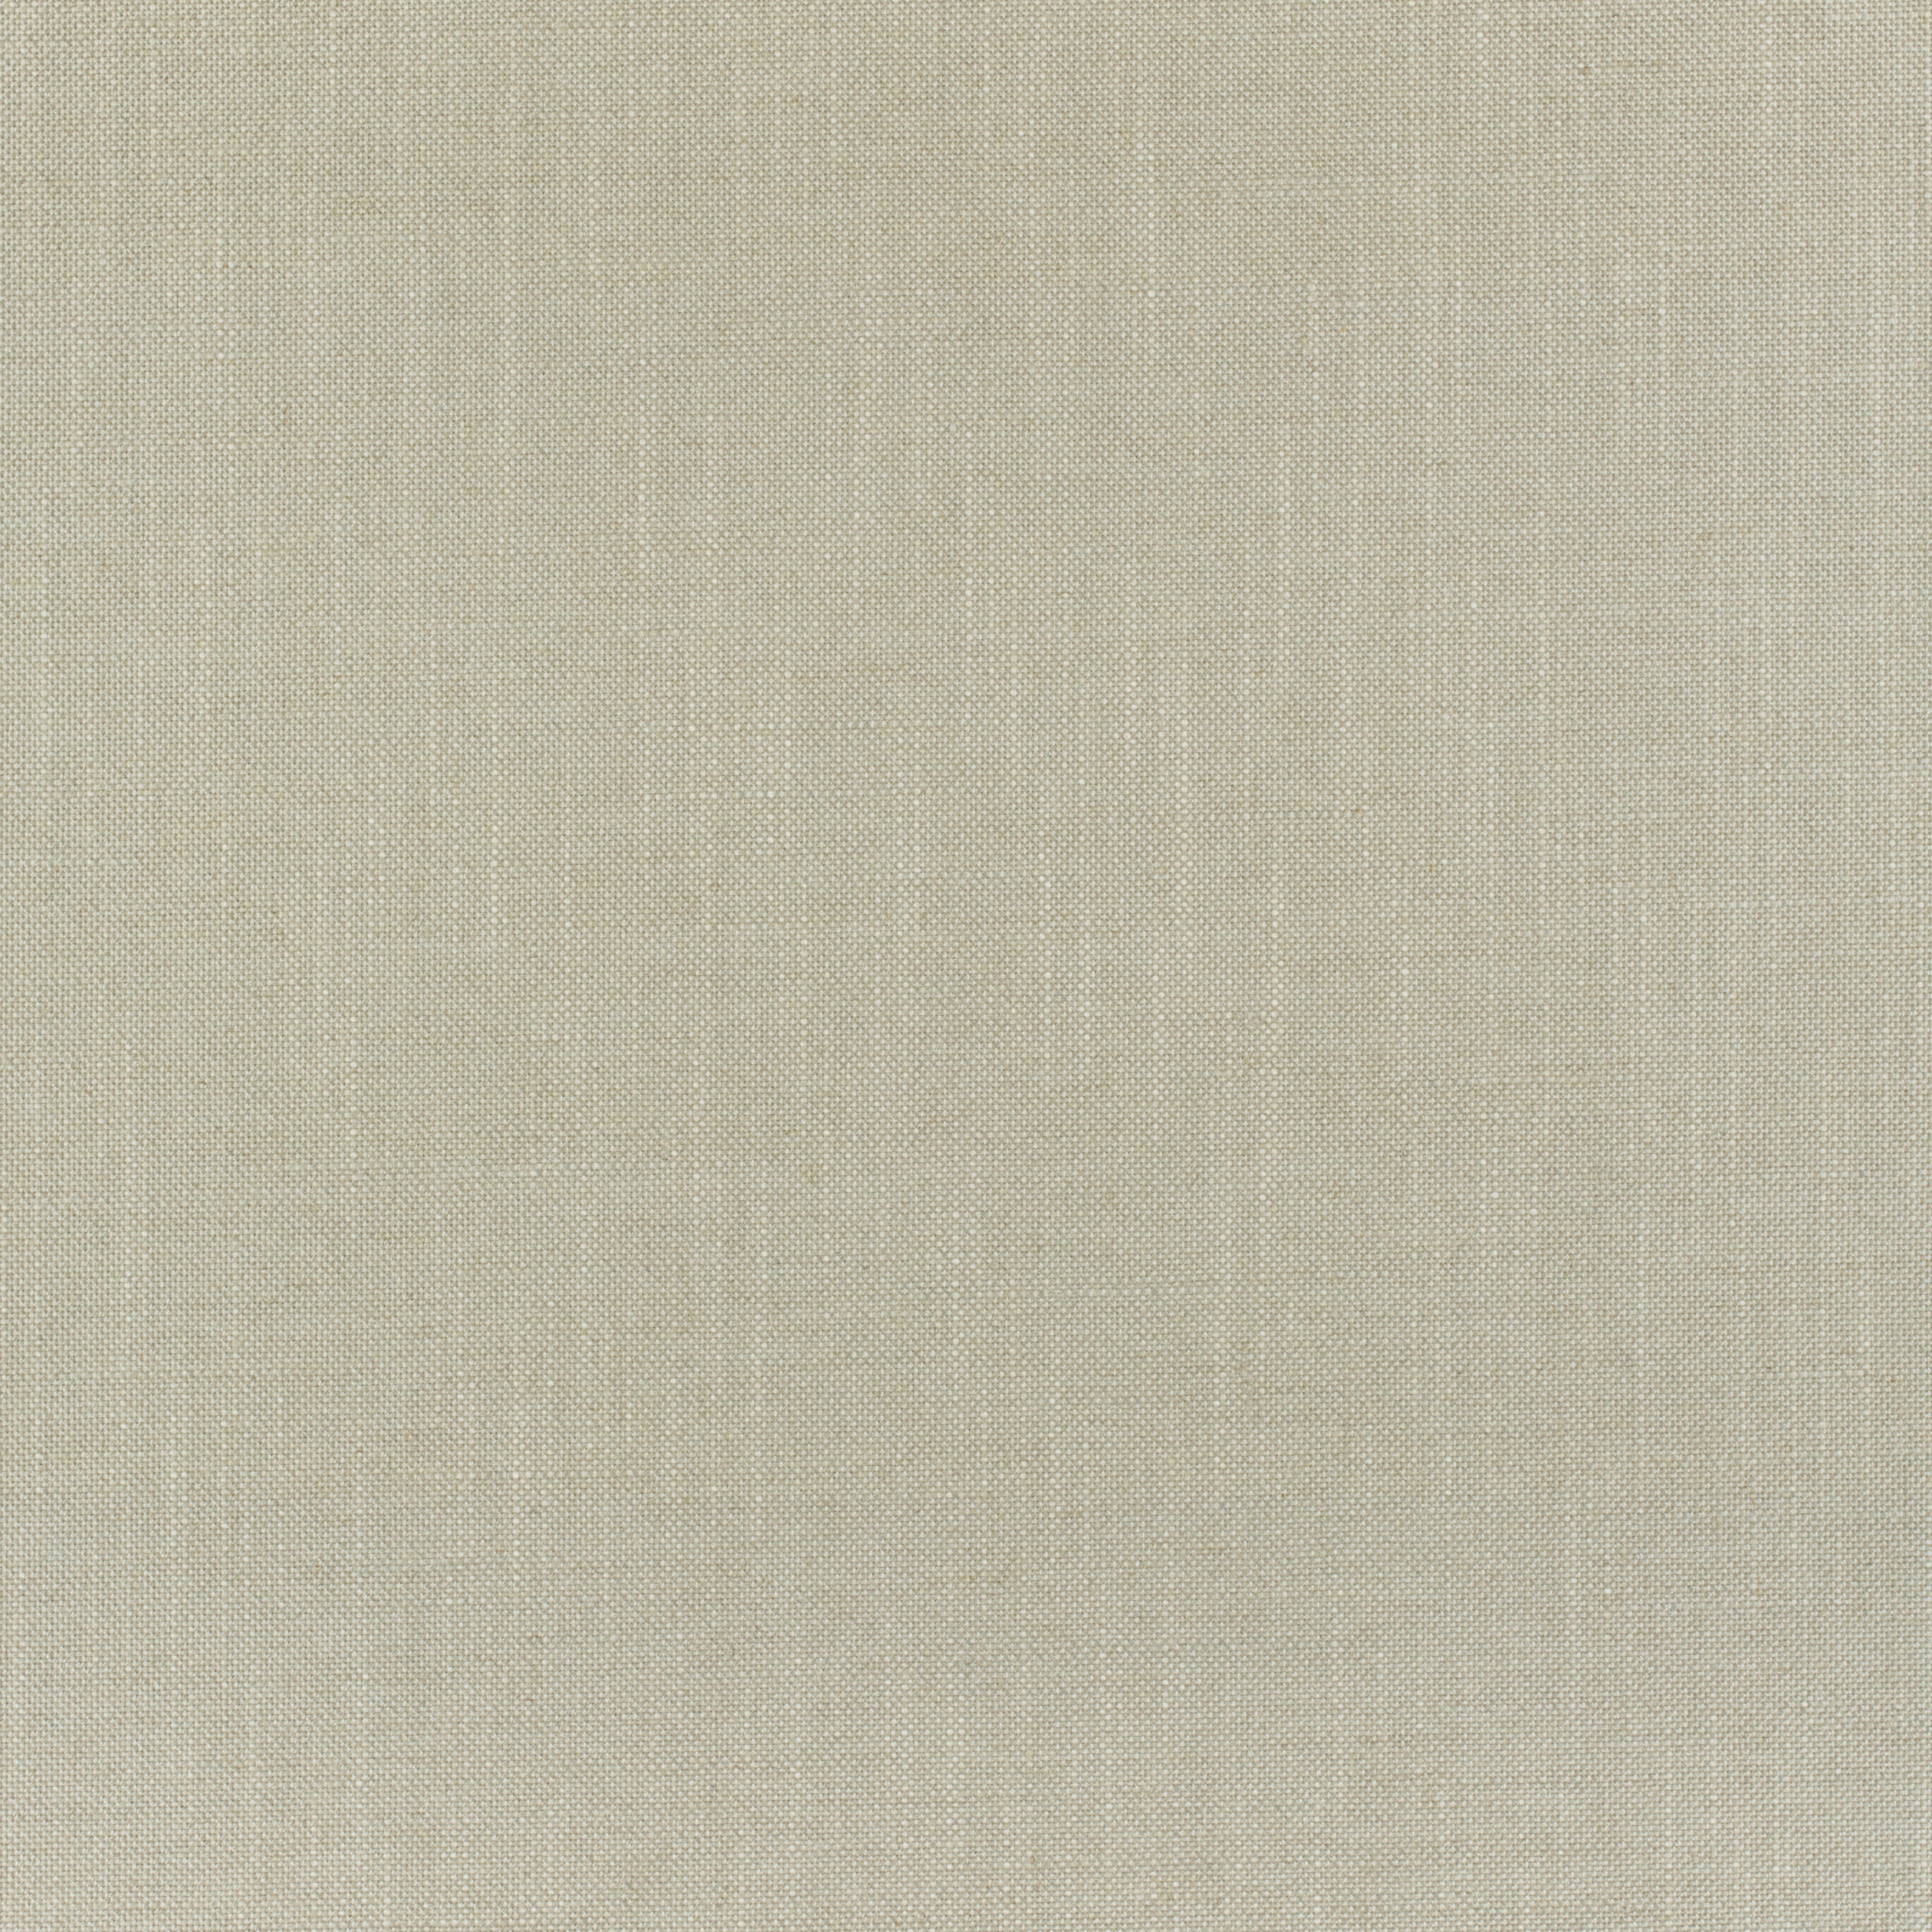 Lira fabric in linen color - pattern number W80464 - by Thibaut in the Mosaic collection